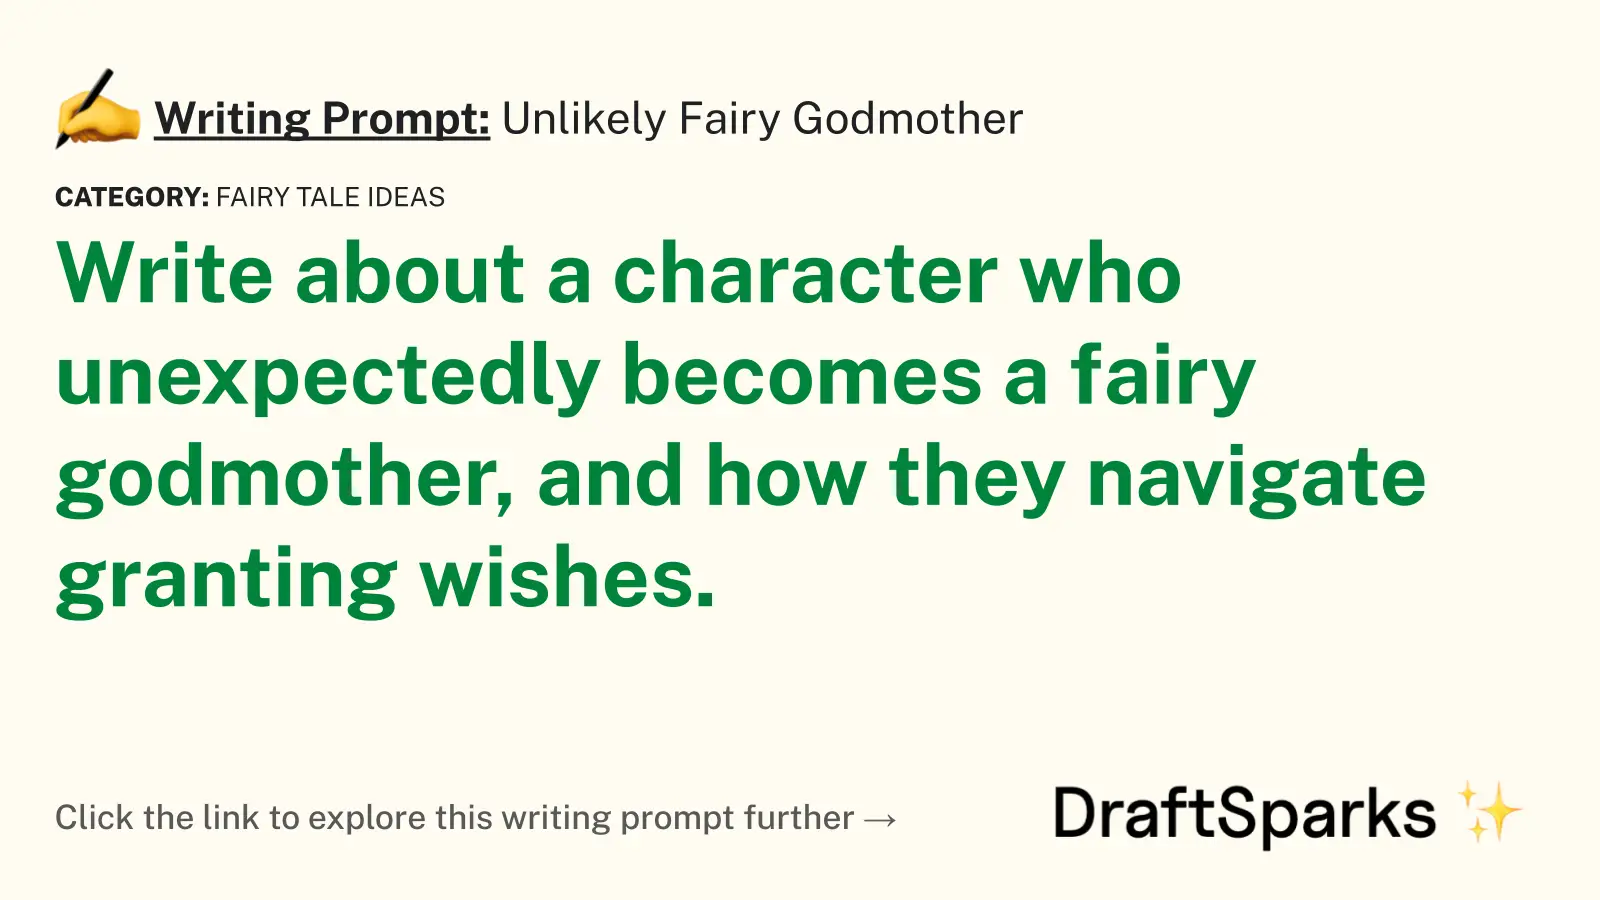 Unlikely Fairy Godmother